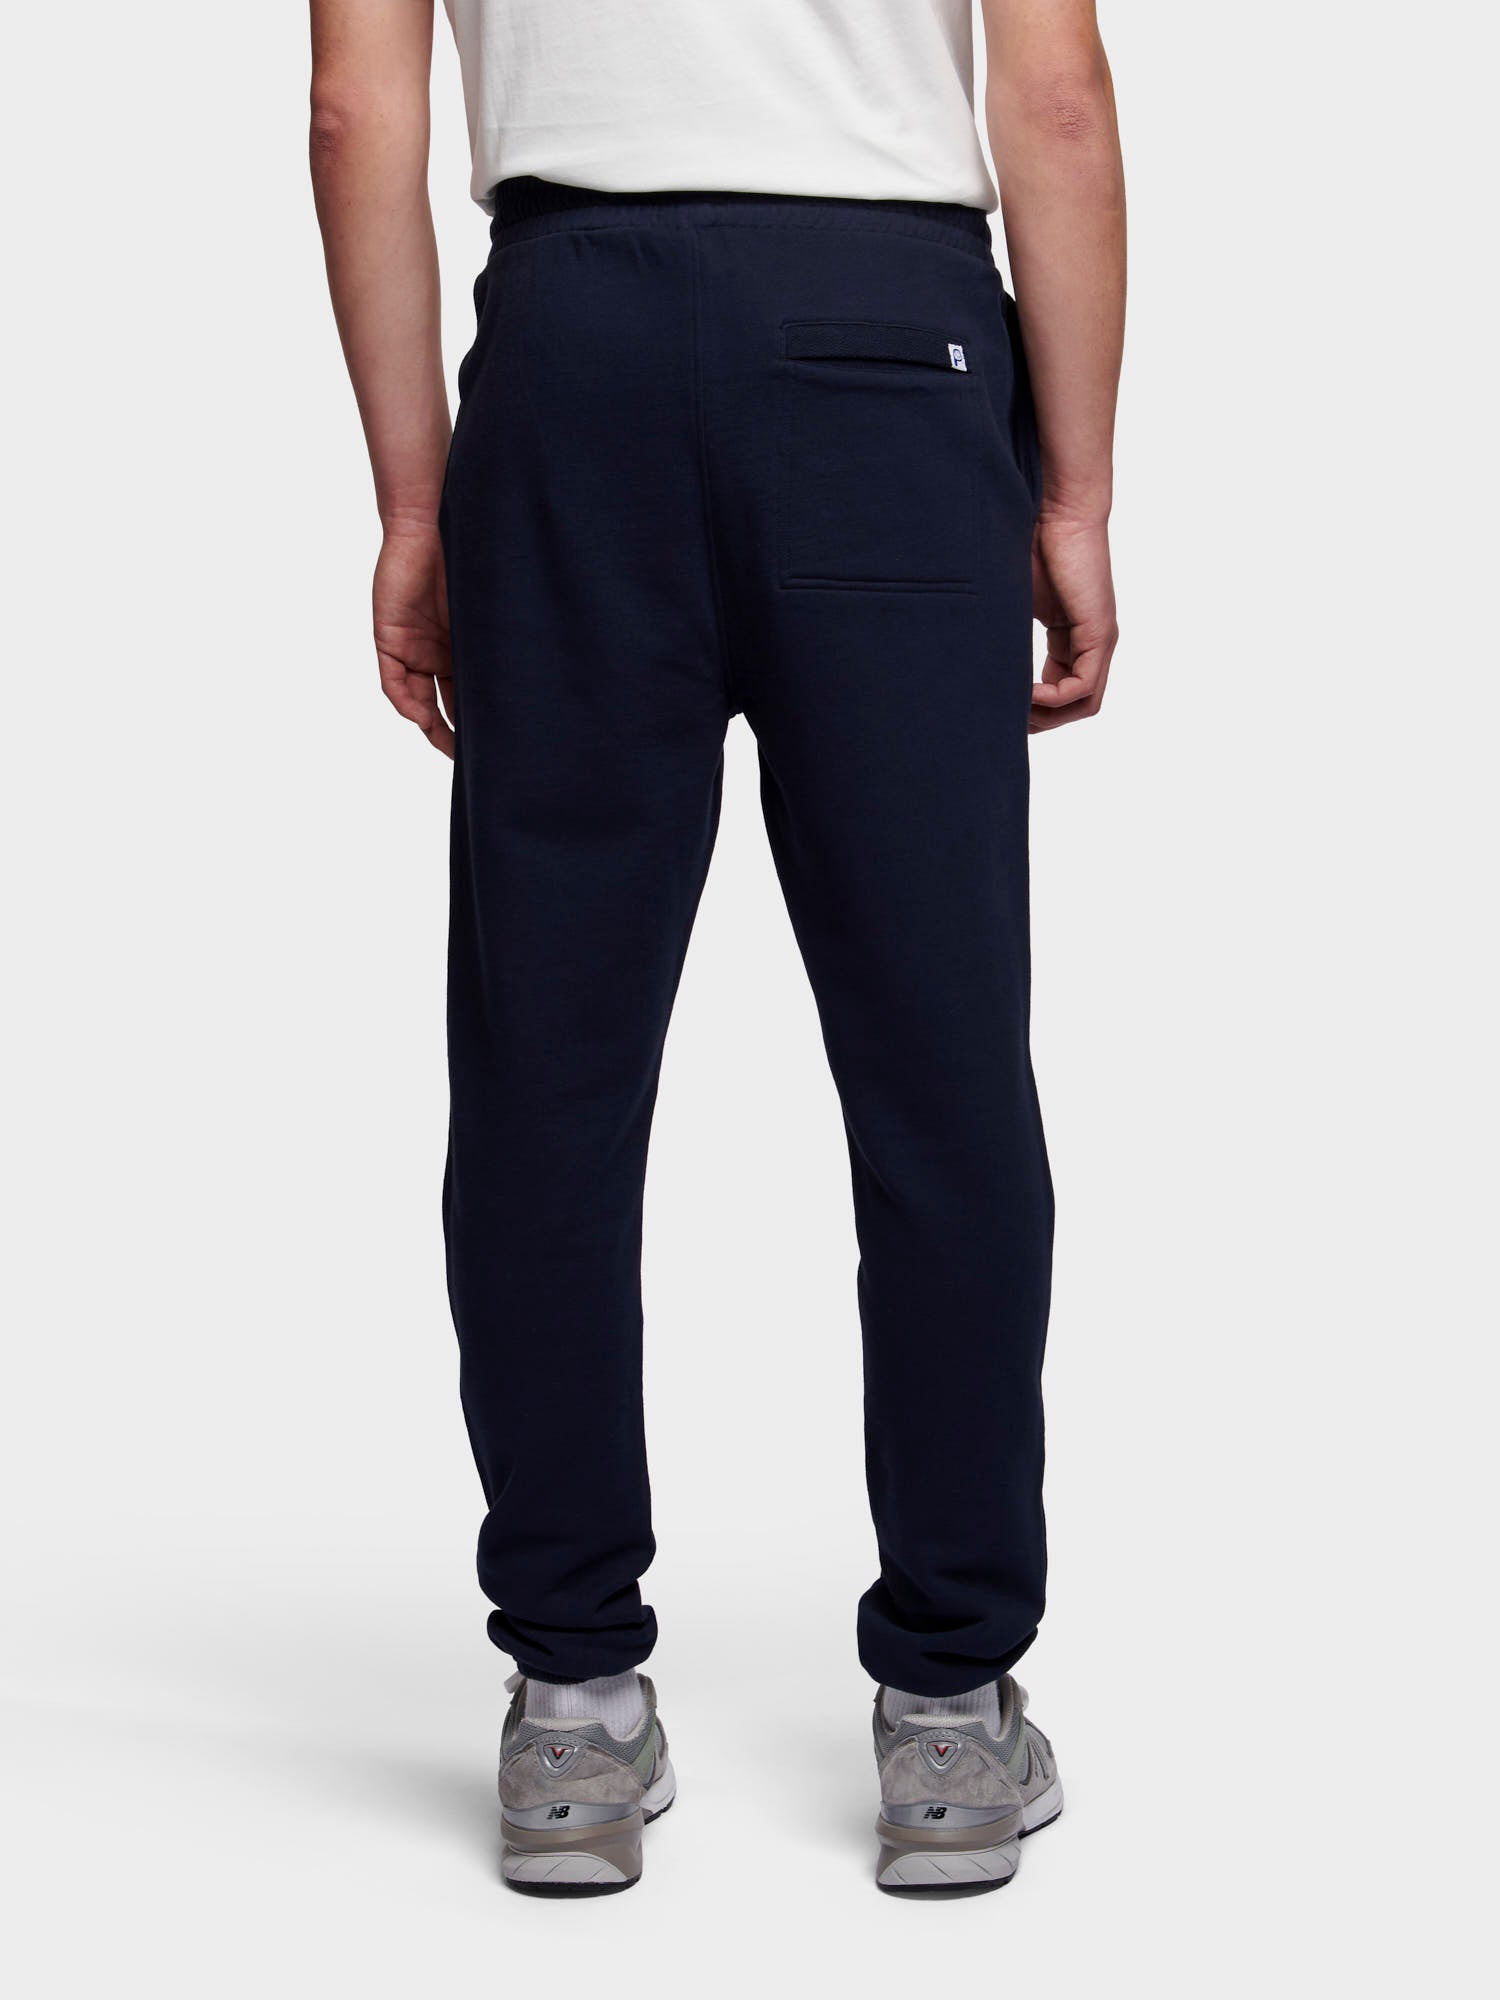 Relaxed Fit Original Logo Joggers in Sky Captain